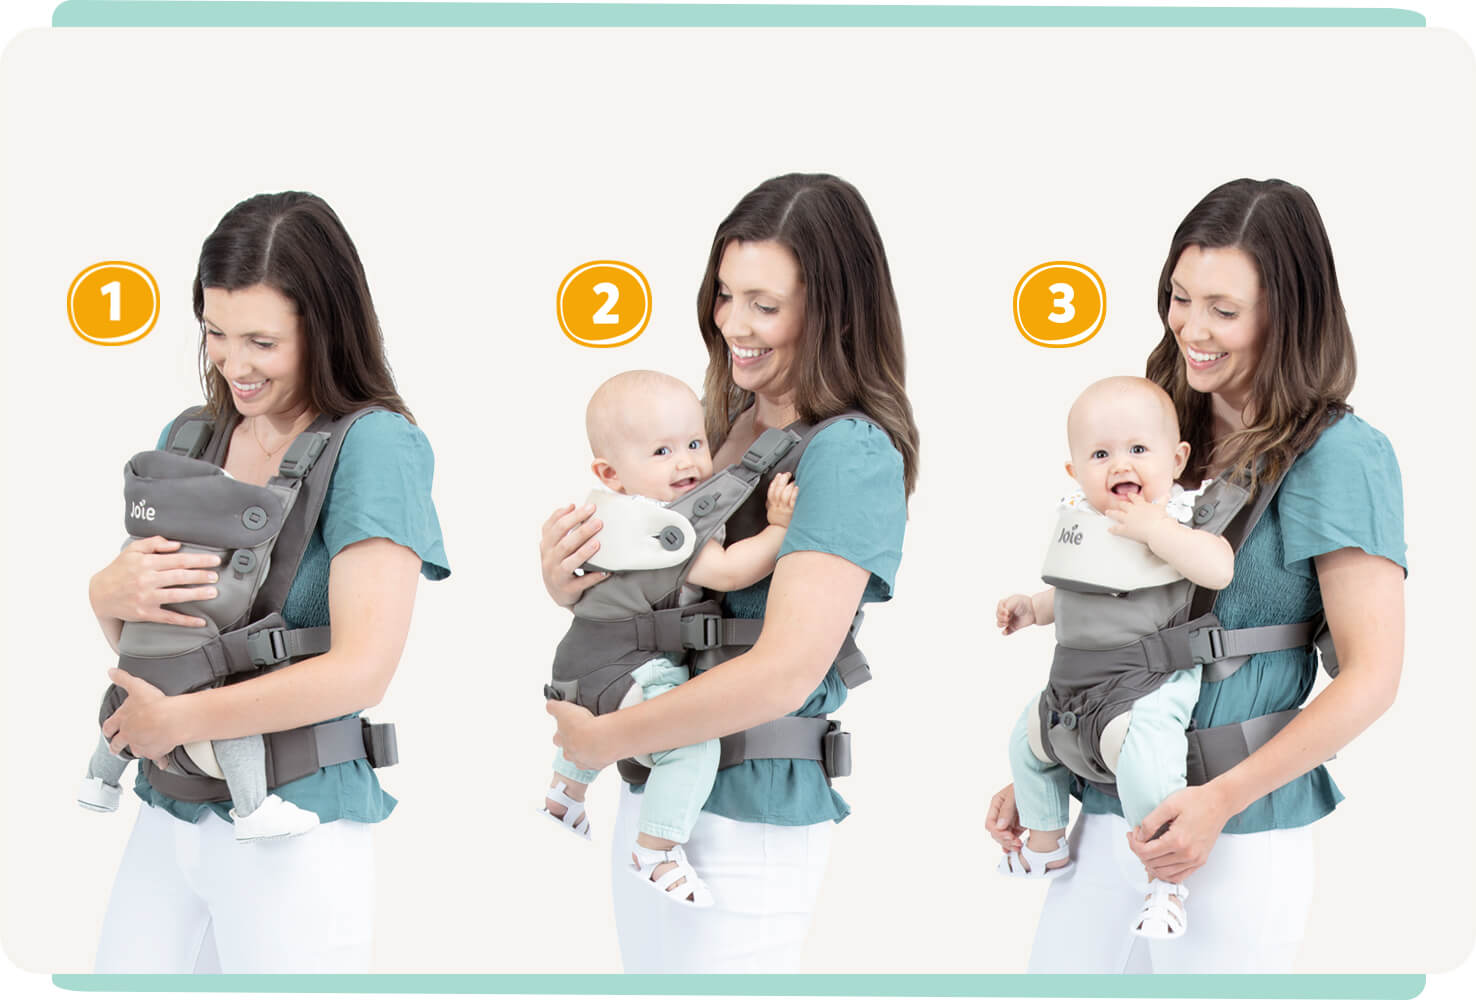 3 images of mums wearing babies in a gray Joie Savvy Lite 3in1 carrier. From left to right: infant mode, parent facing baby mode, world facing baby mode. 